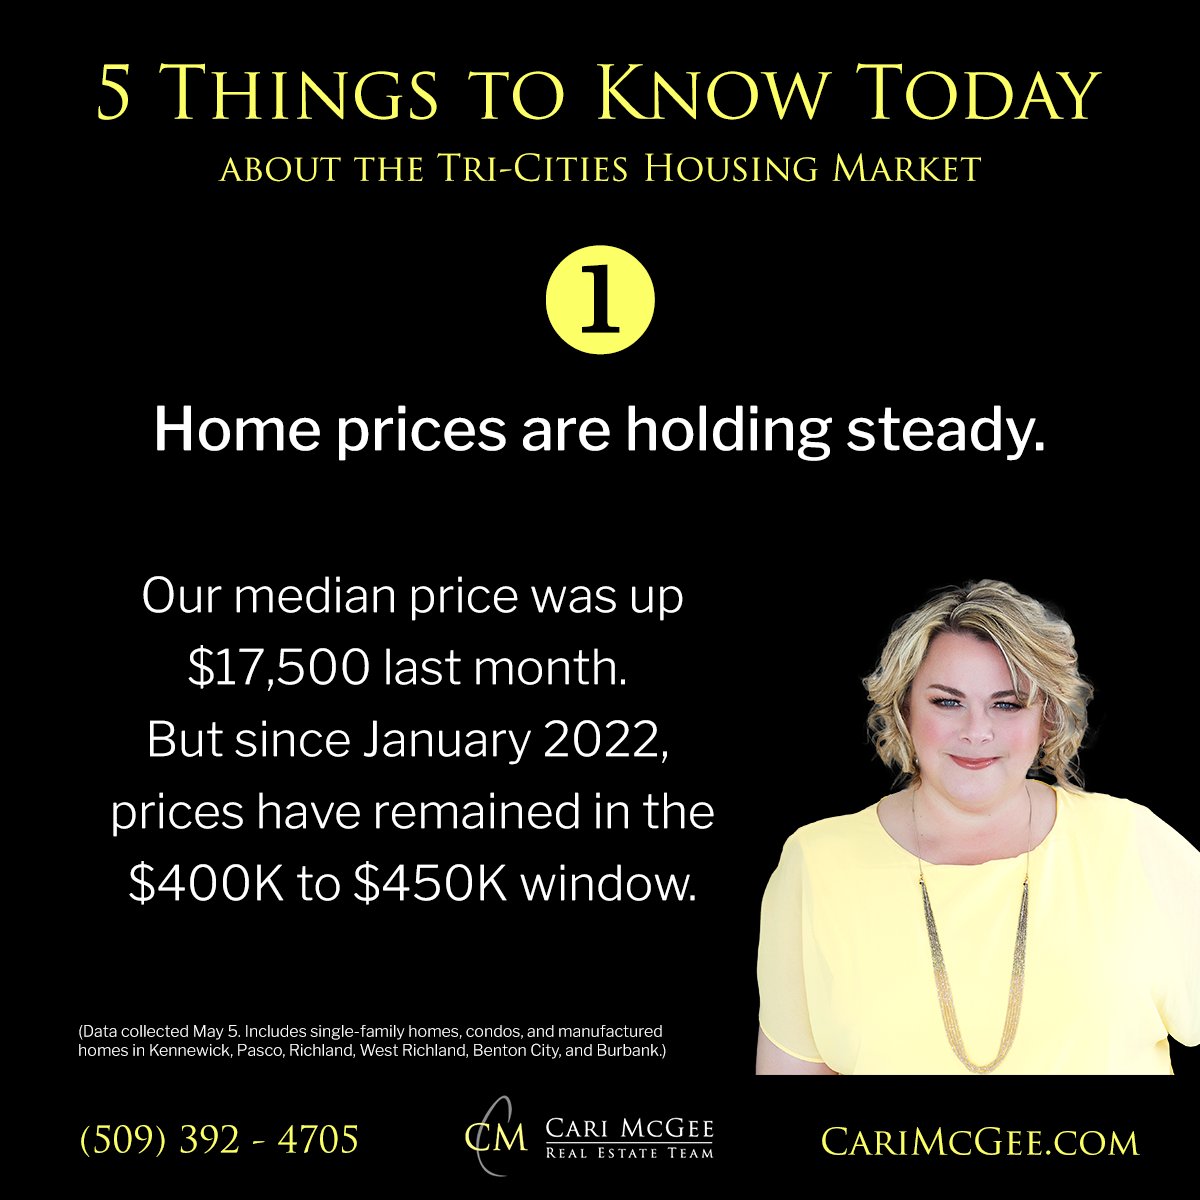 A thread! 

Five things to know right now about the #TriCitiesWA real estate market:

1. Home prices have stayed in the $400K - $450K window since January 2022. 

They've see-sawed a bit from one month to the next, but overall are very steady.